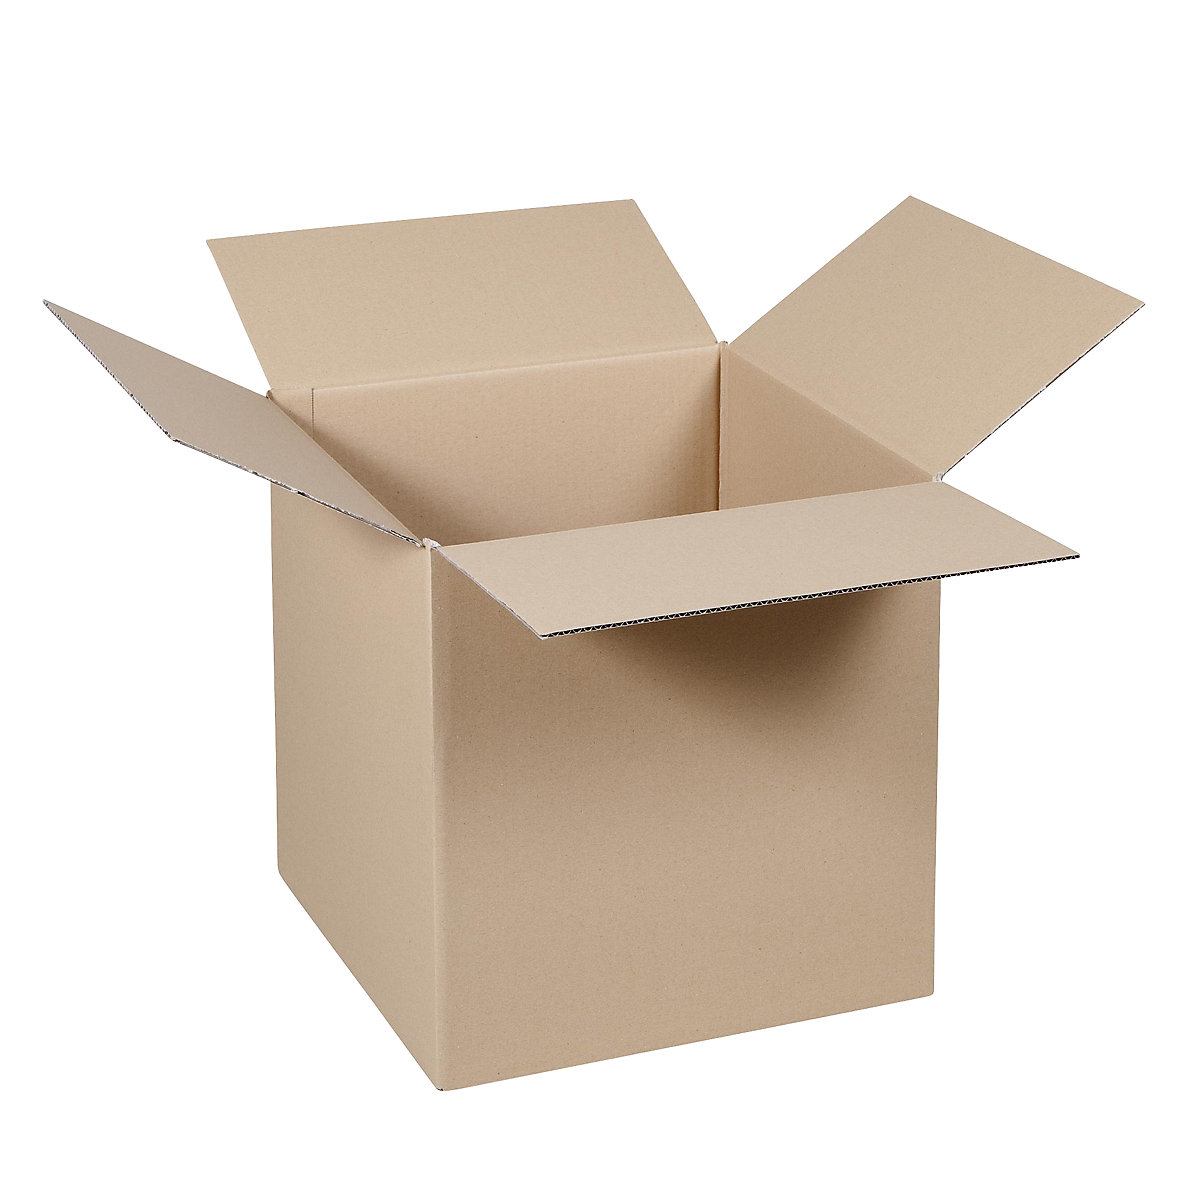 Folding cardboard box, FEFCO 0201, made of double fluted cardboard, internal dimensions 300 x 300 x 300 mm, pack of 50-15